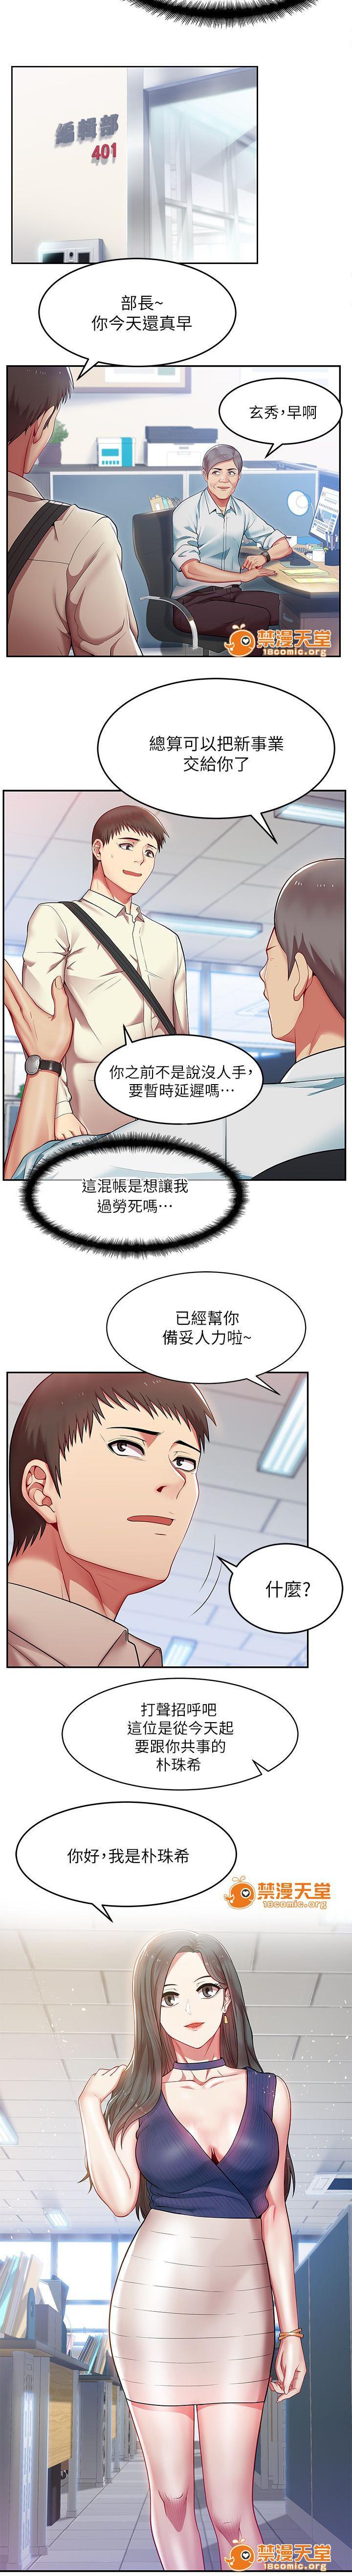 Two 共事密友 1-27 Gape - Page 4